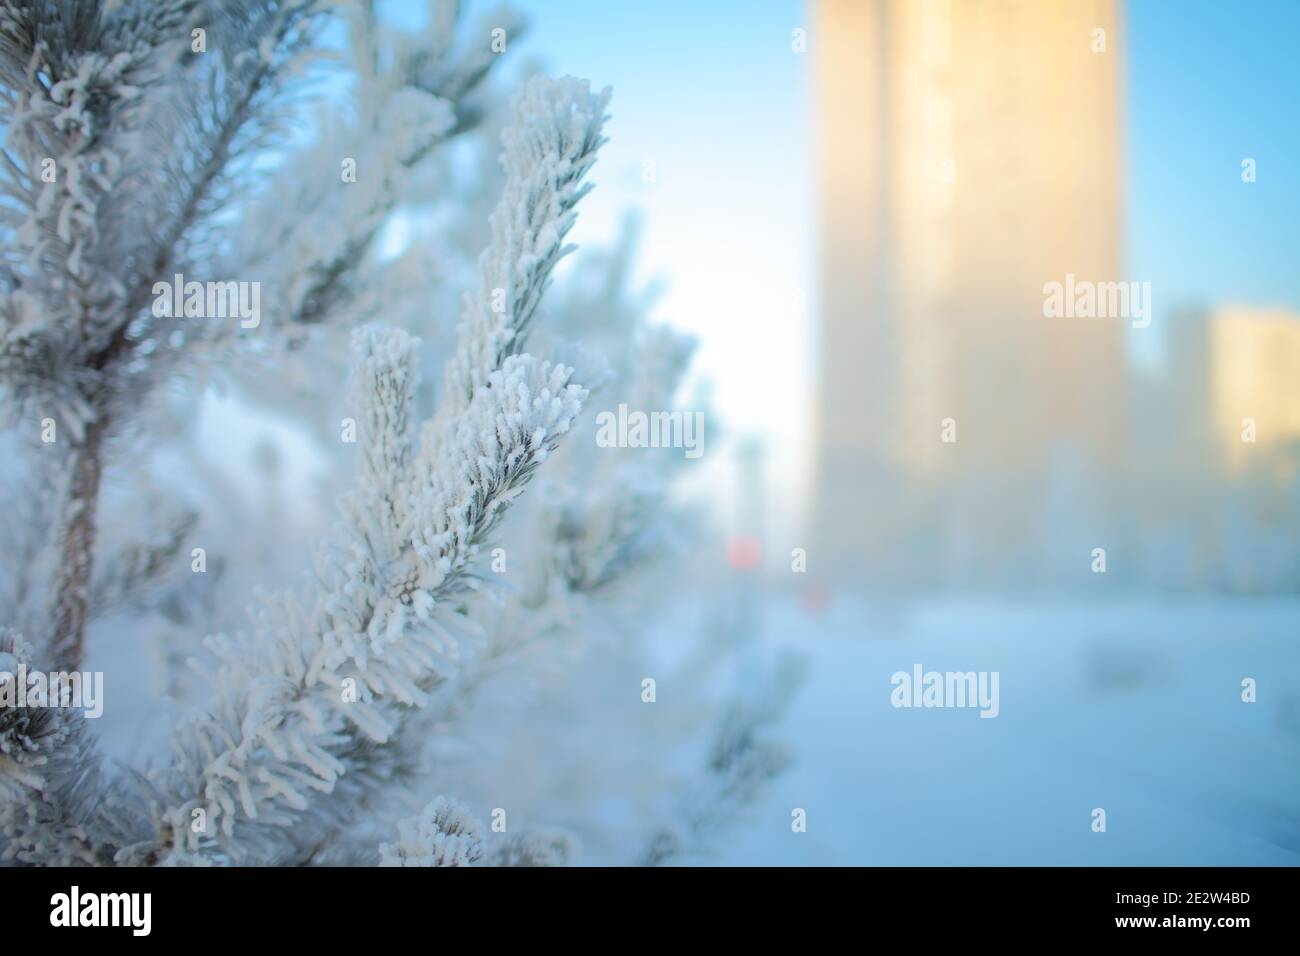 Winter cityscape with frozen tree. Stock Photo